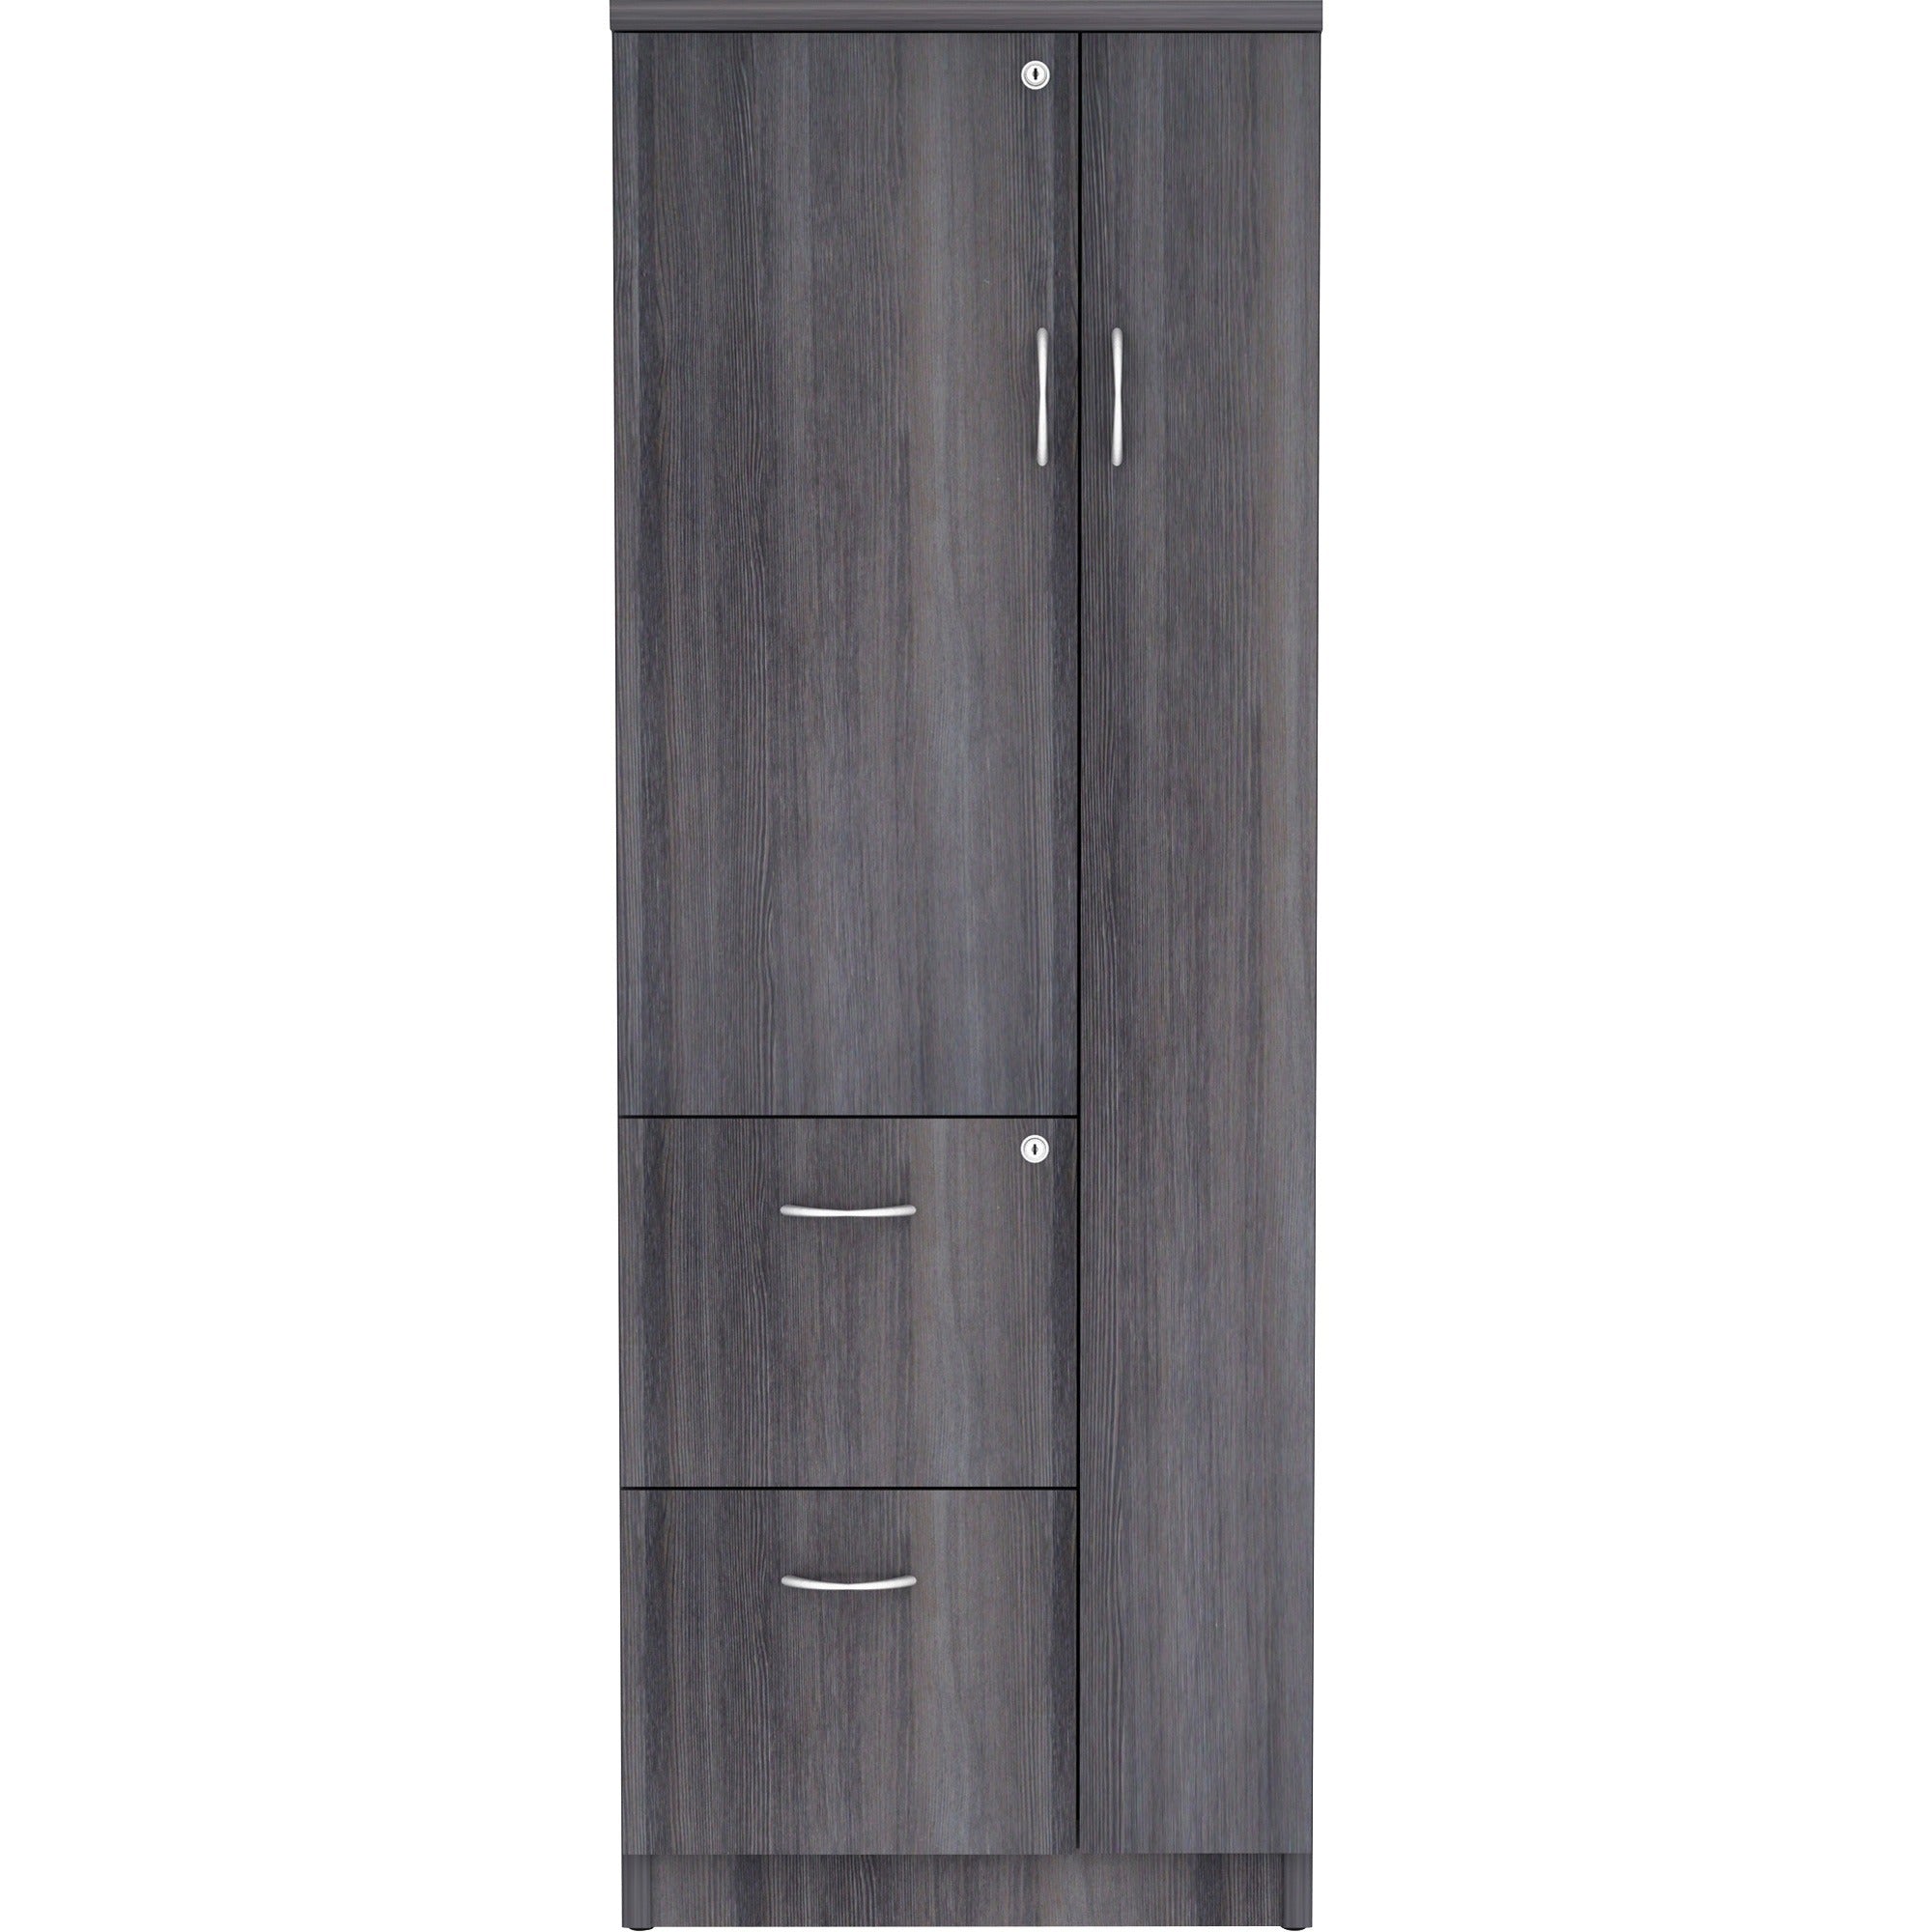 lorell-essentials-revelance-tall-storage-cabinet-236-x-236656-2-drawers-2-shelves-material-medium-density-fiberboard-mdf-particleboard-finish-weathered-charcoal-abrasion-resistant_llr69659 - 2